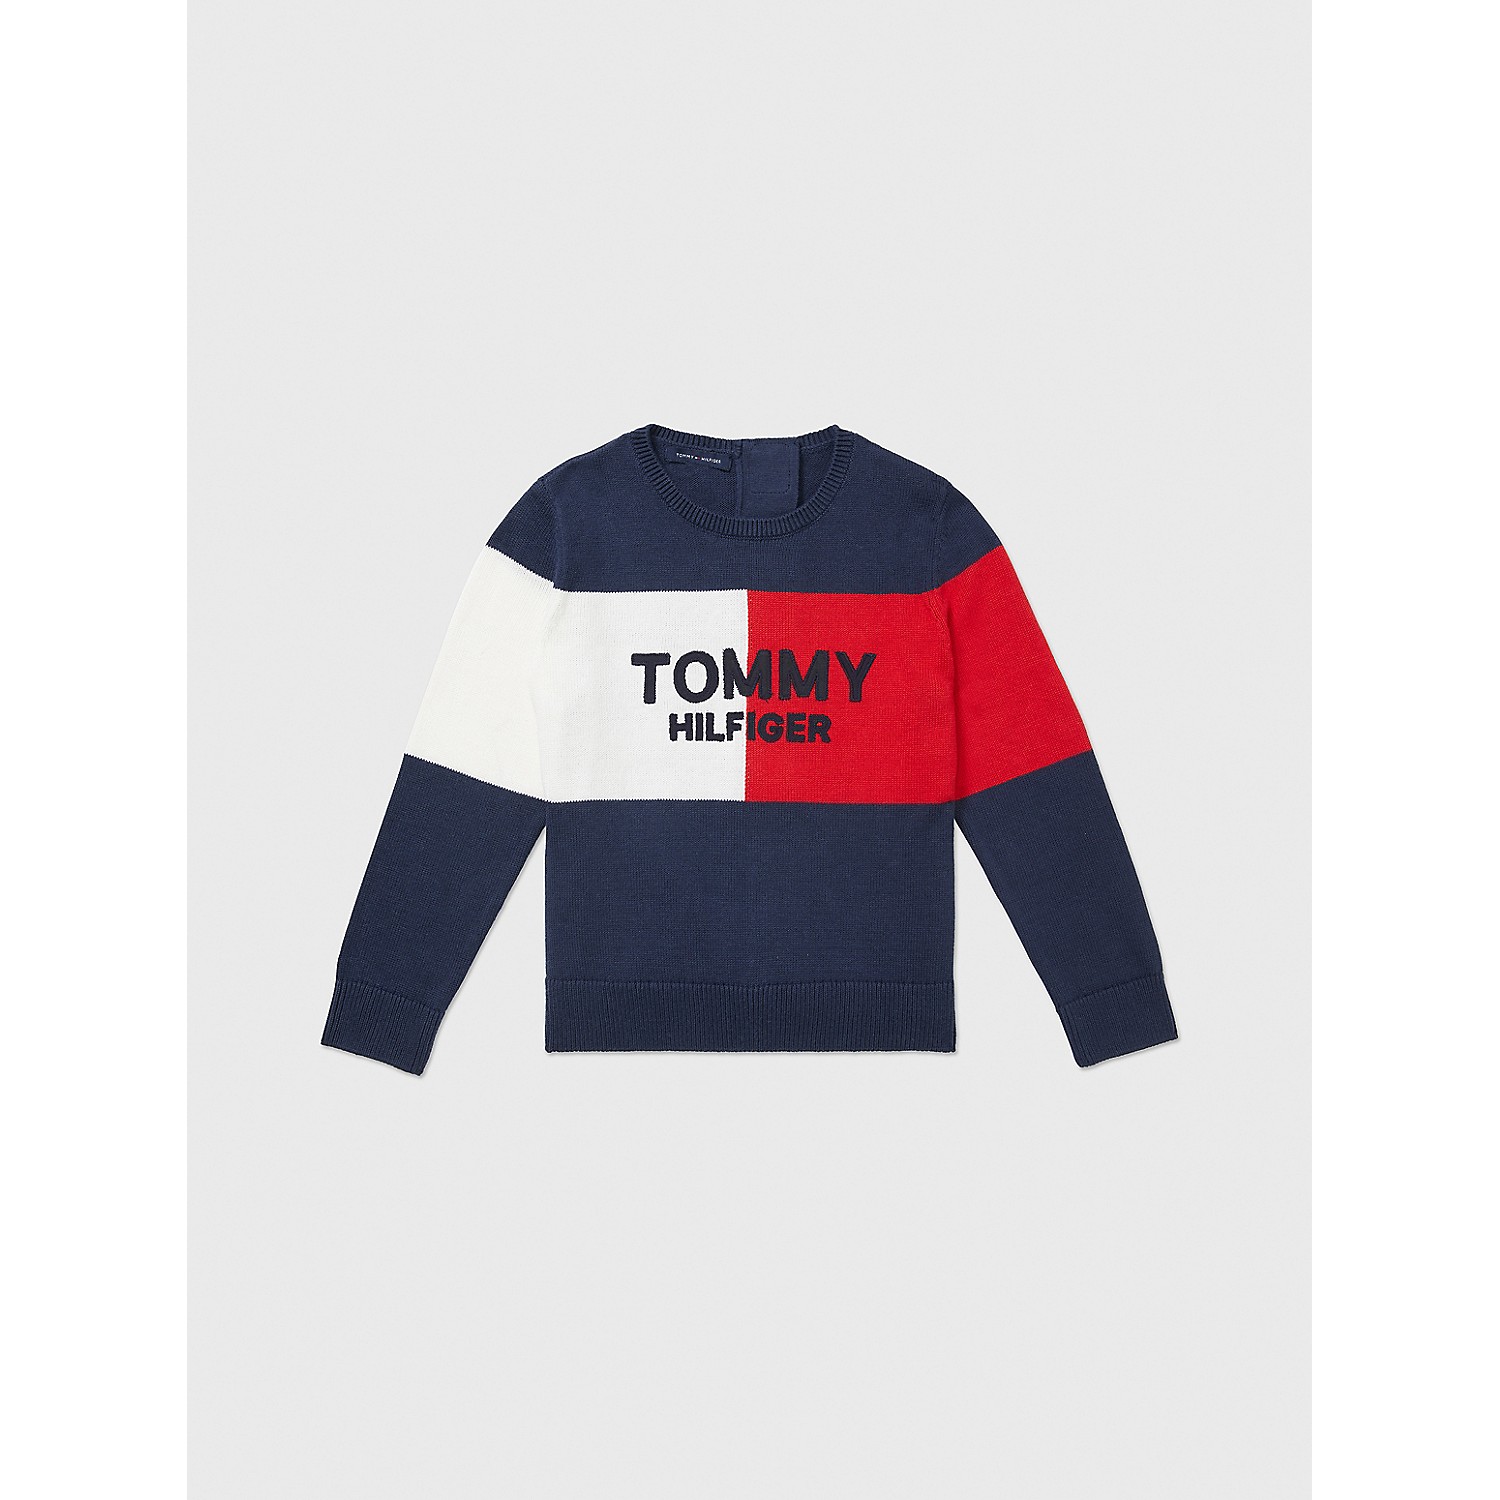 TOMMY HILFIGER Kids Seated Fit Flag Sweater